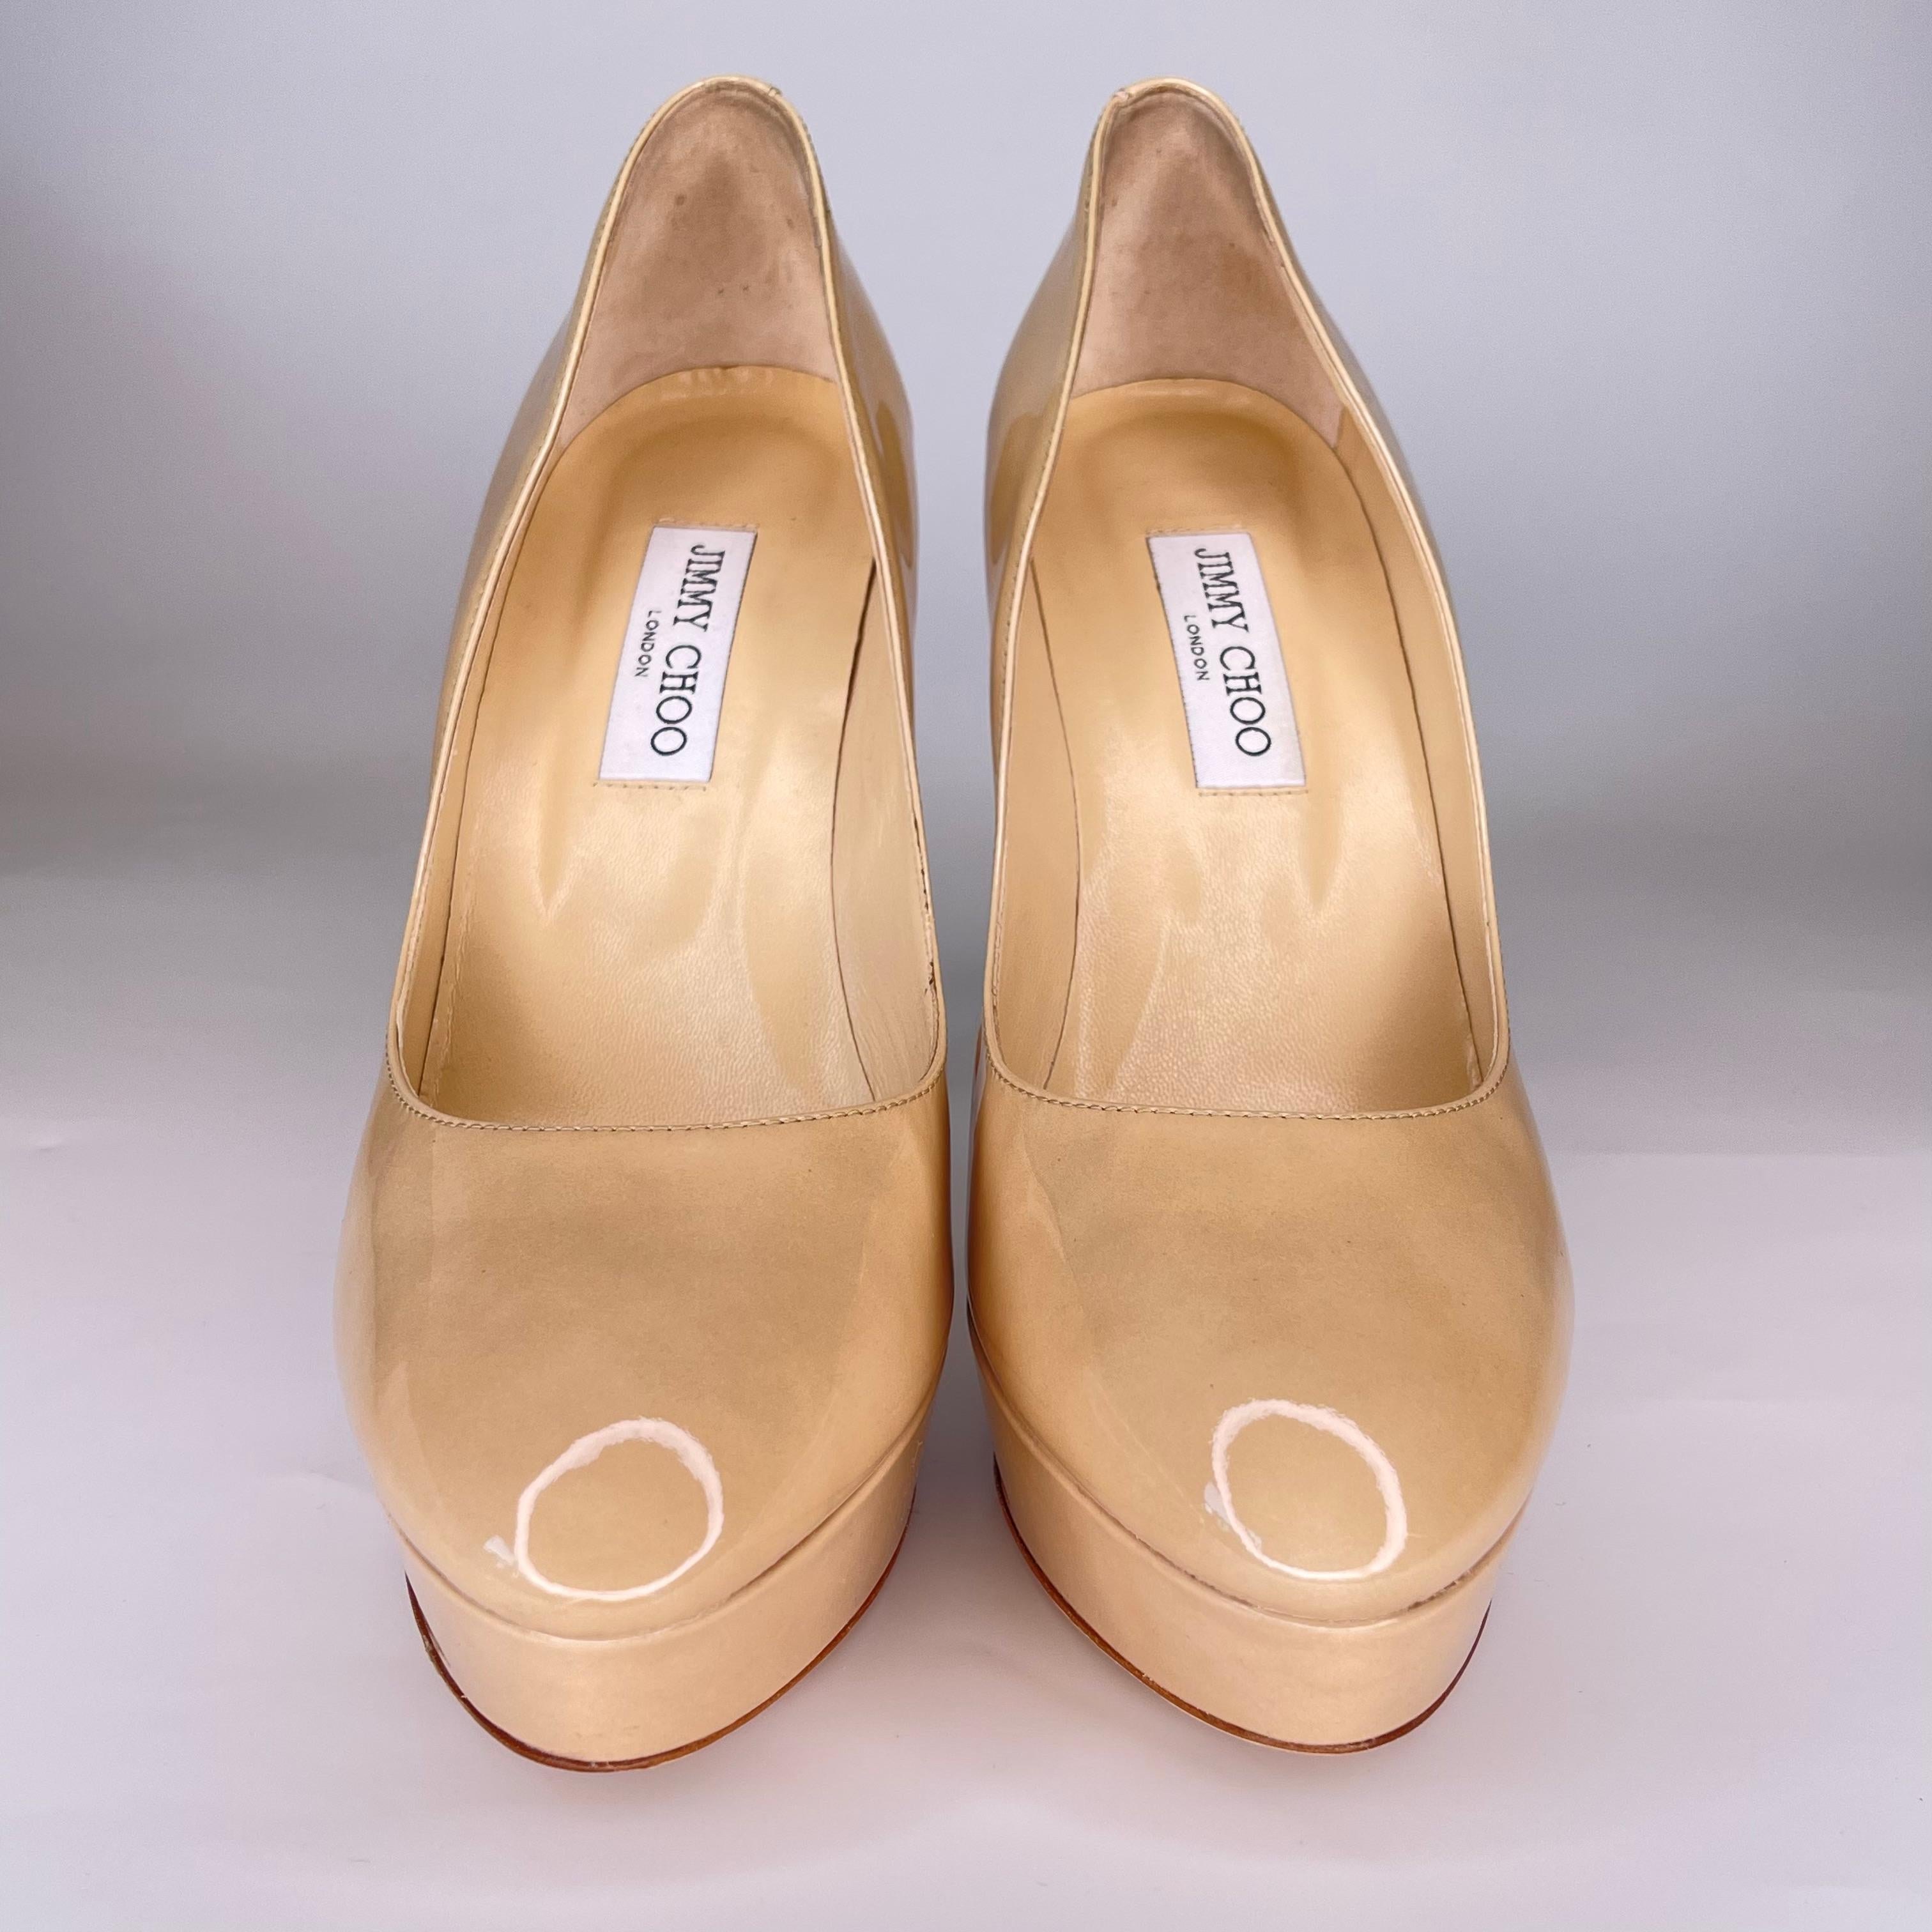 Featuring a patent leather body, these pumps showcase style and elegance. This pair by Jimmy Choo has platforms, 13 cm heels, and a glossy finish. The nude pumps will look great with formal as well as casual wear.

COLOR: Nude
MATERIAL: Patent